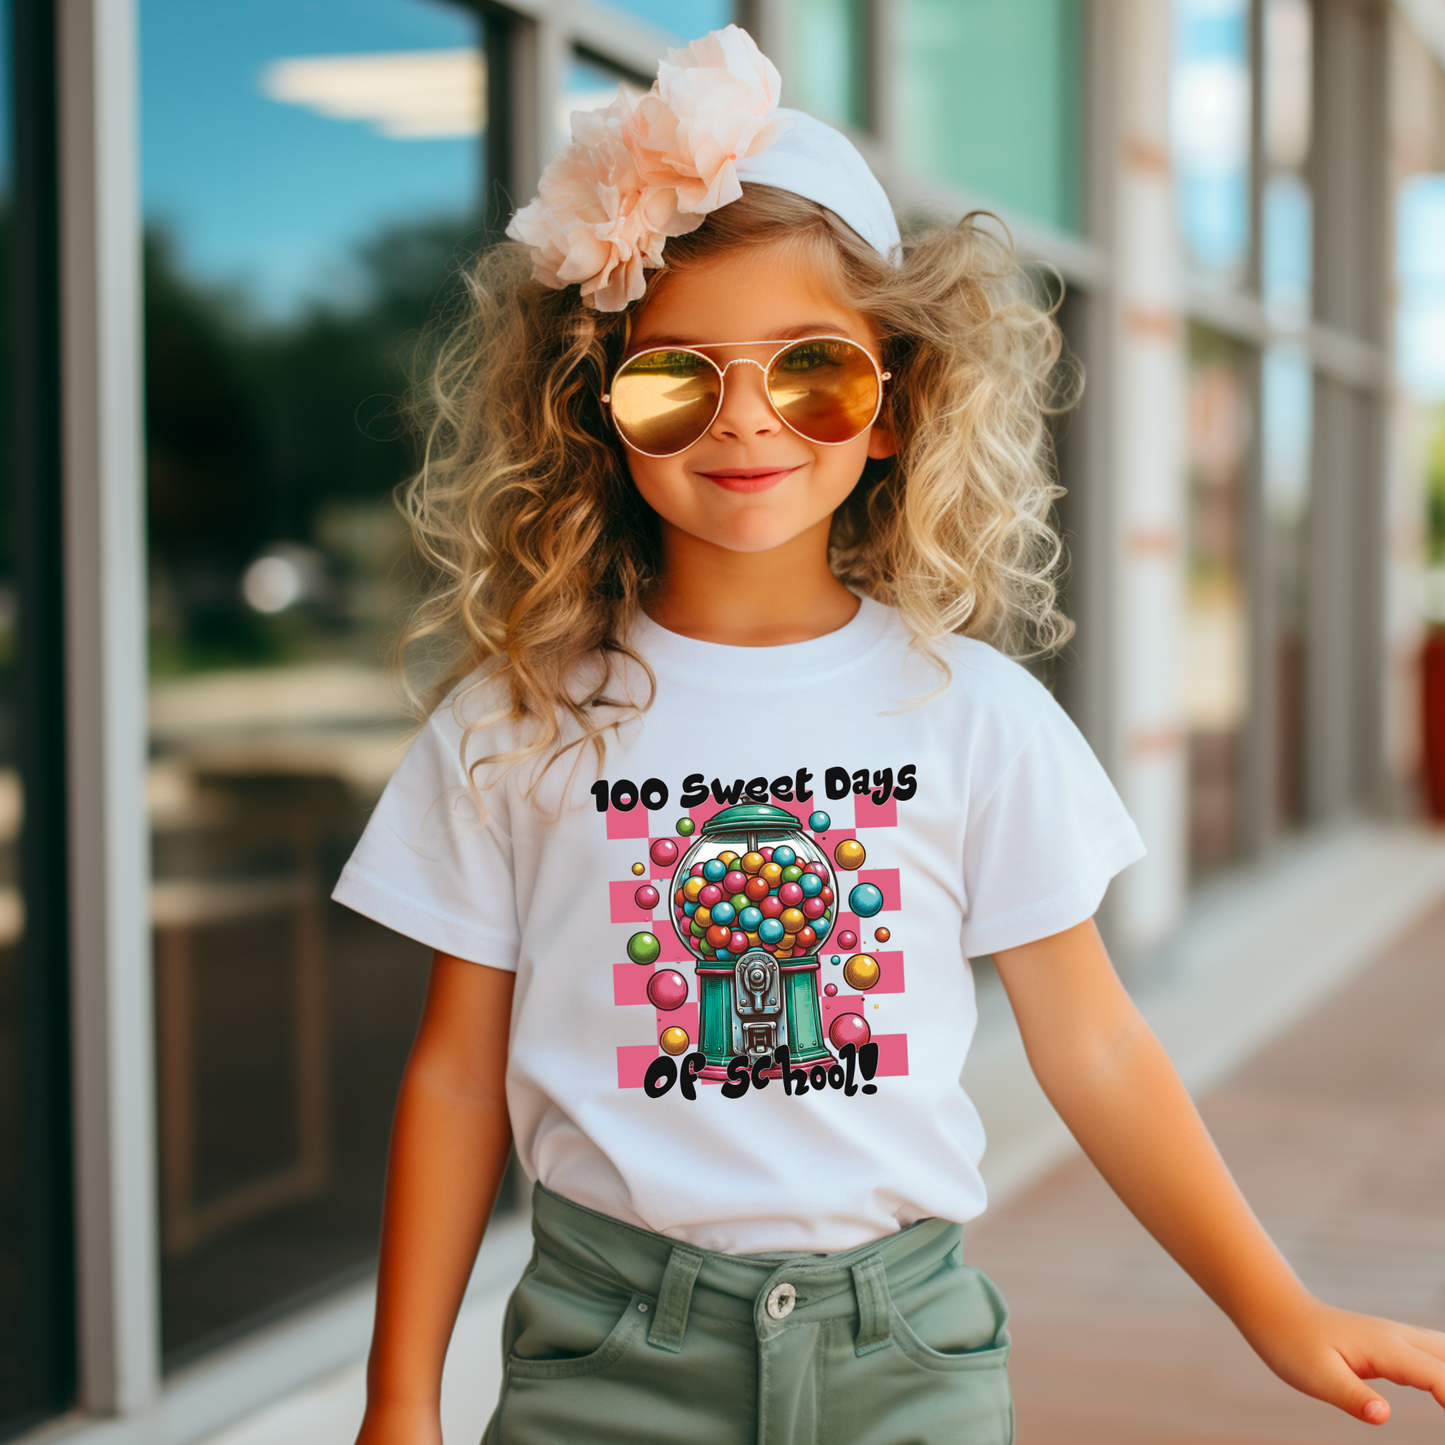 100 Sweet Days of School! Youth Graphic Tee